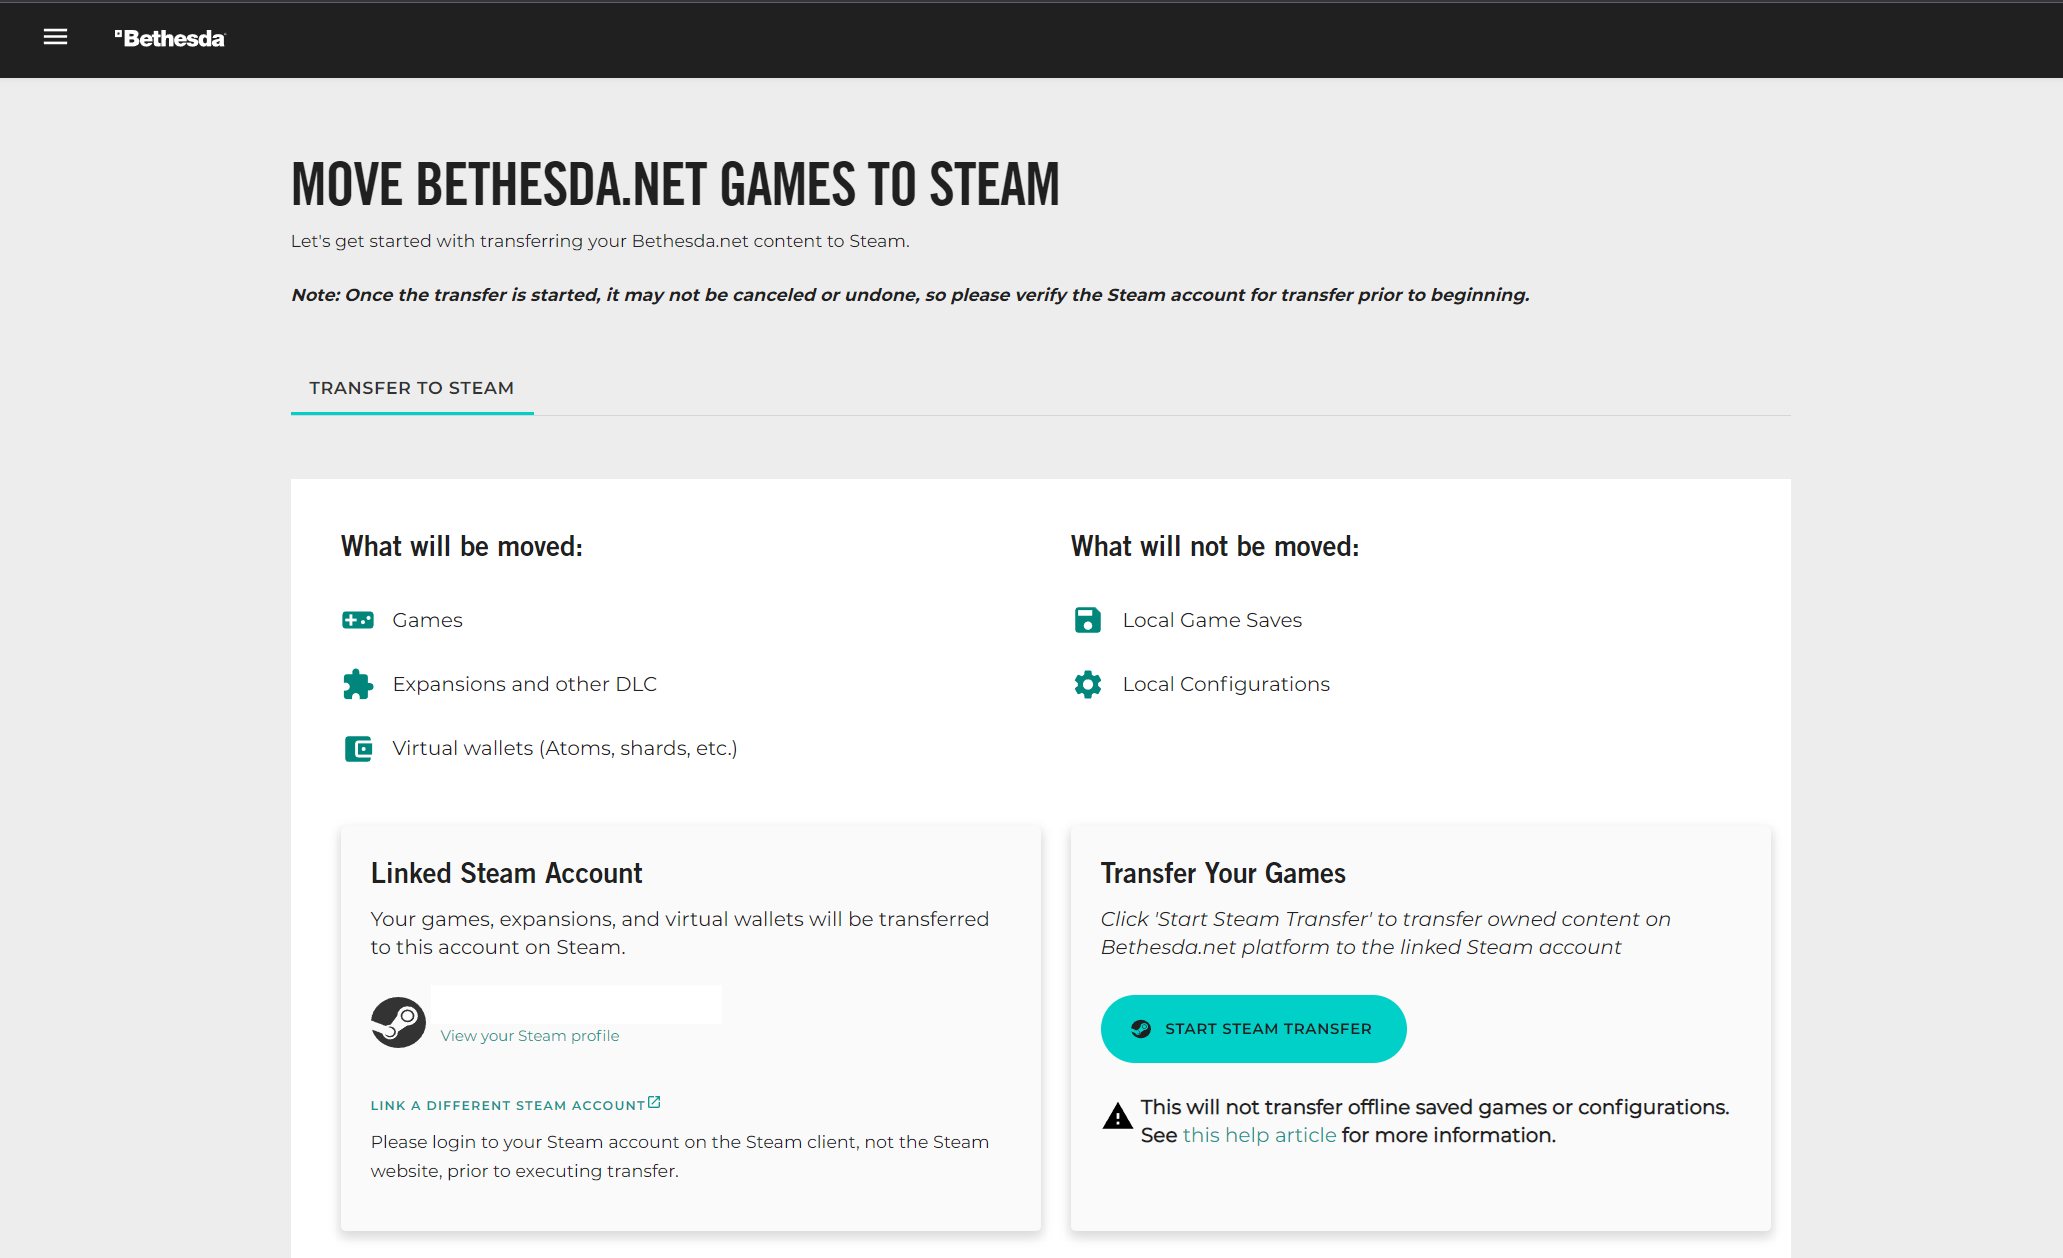 Why was my password reset on the ESO forums? - Bethesda Support